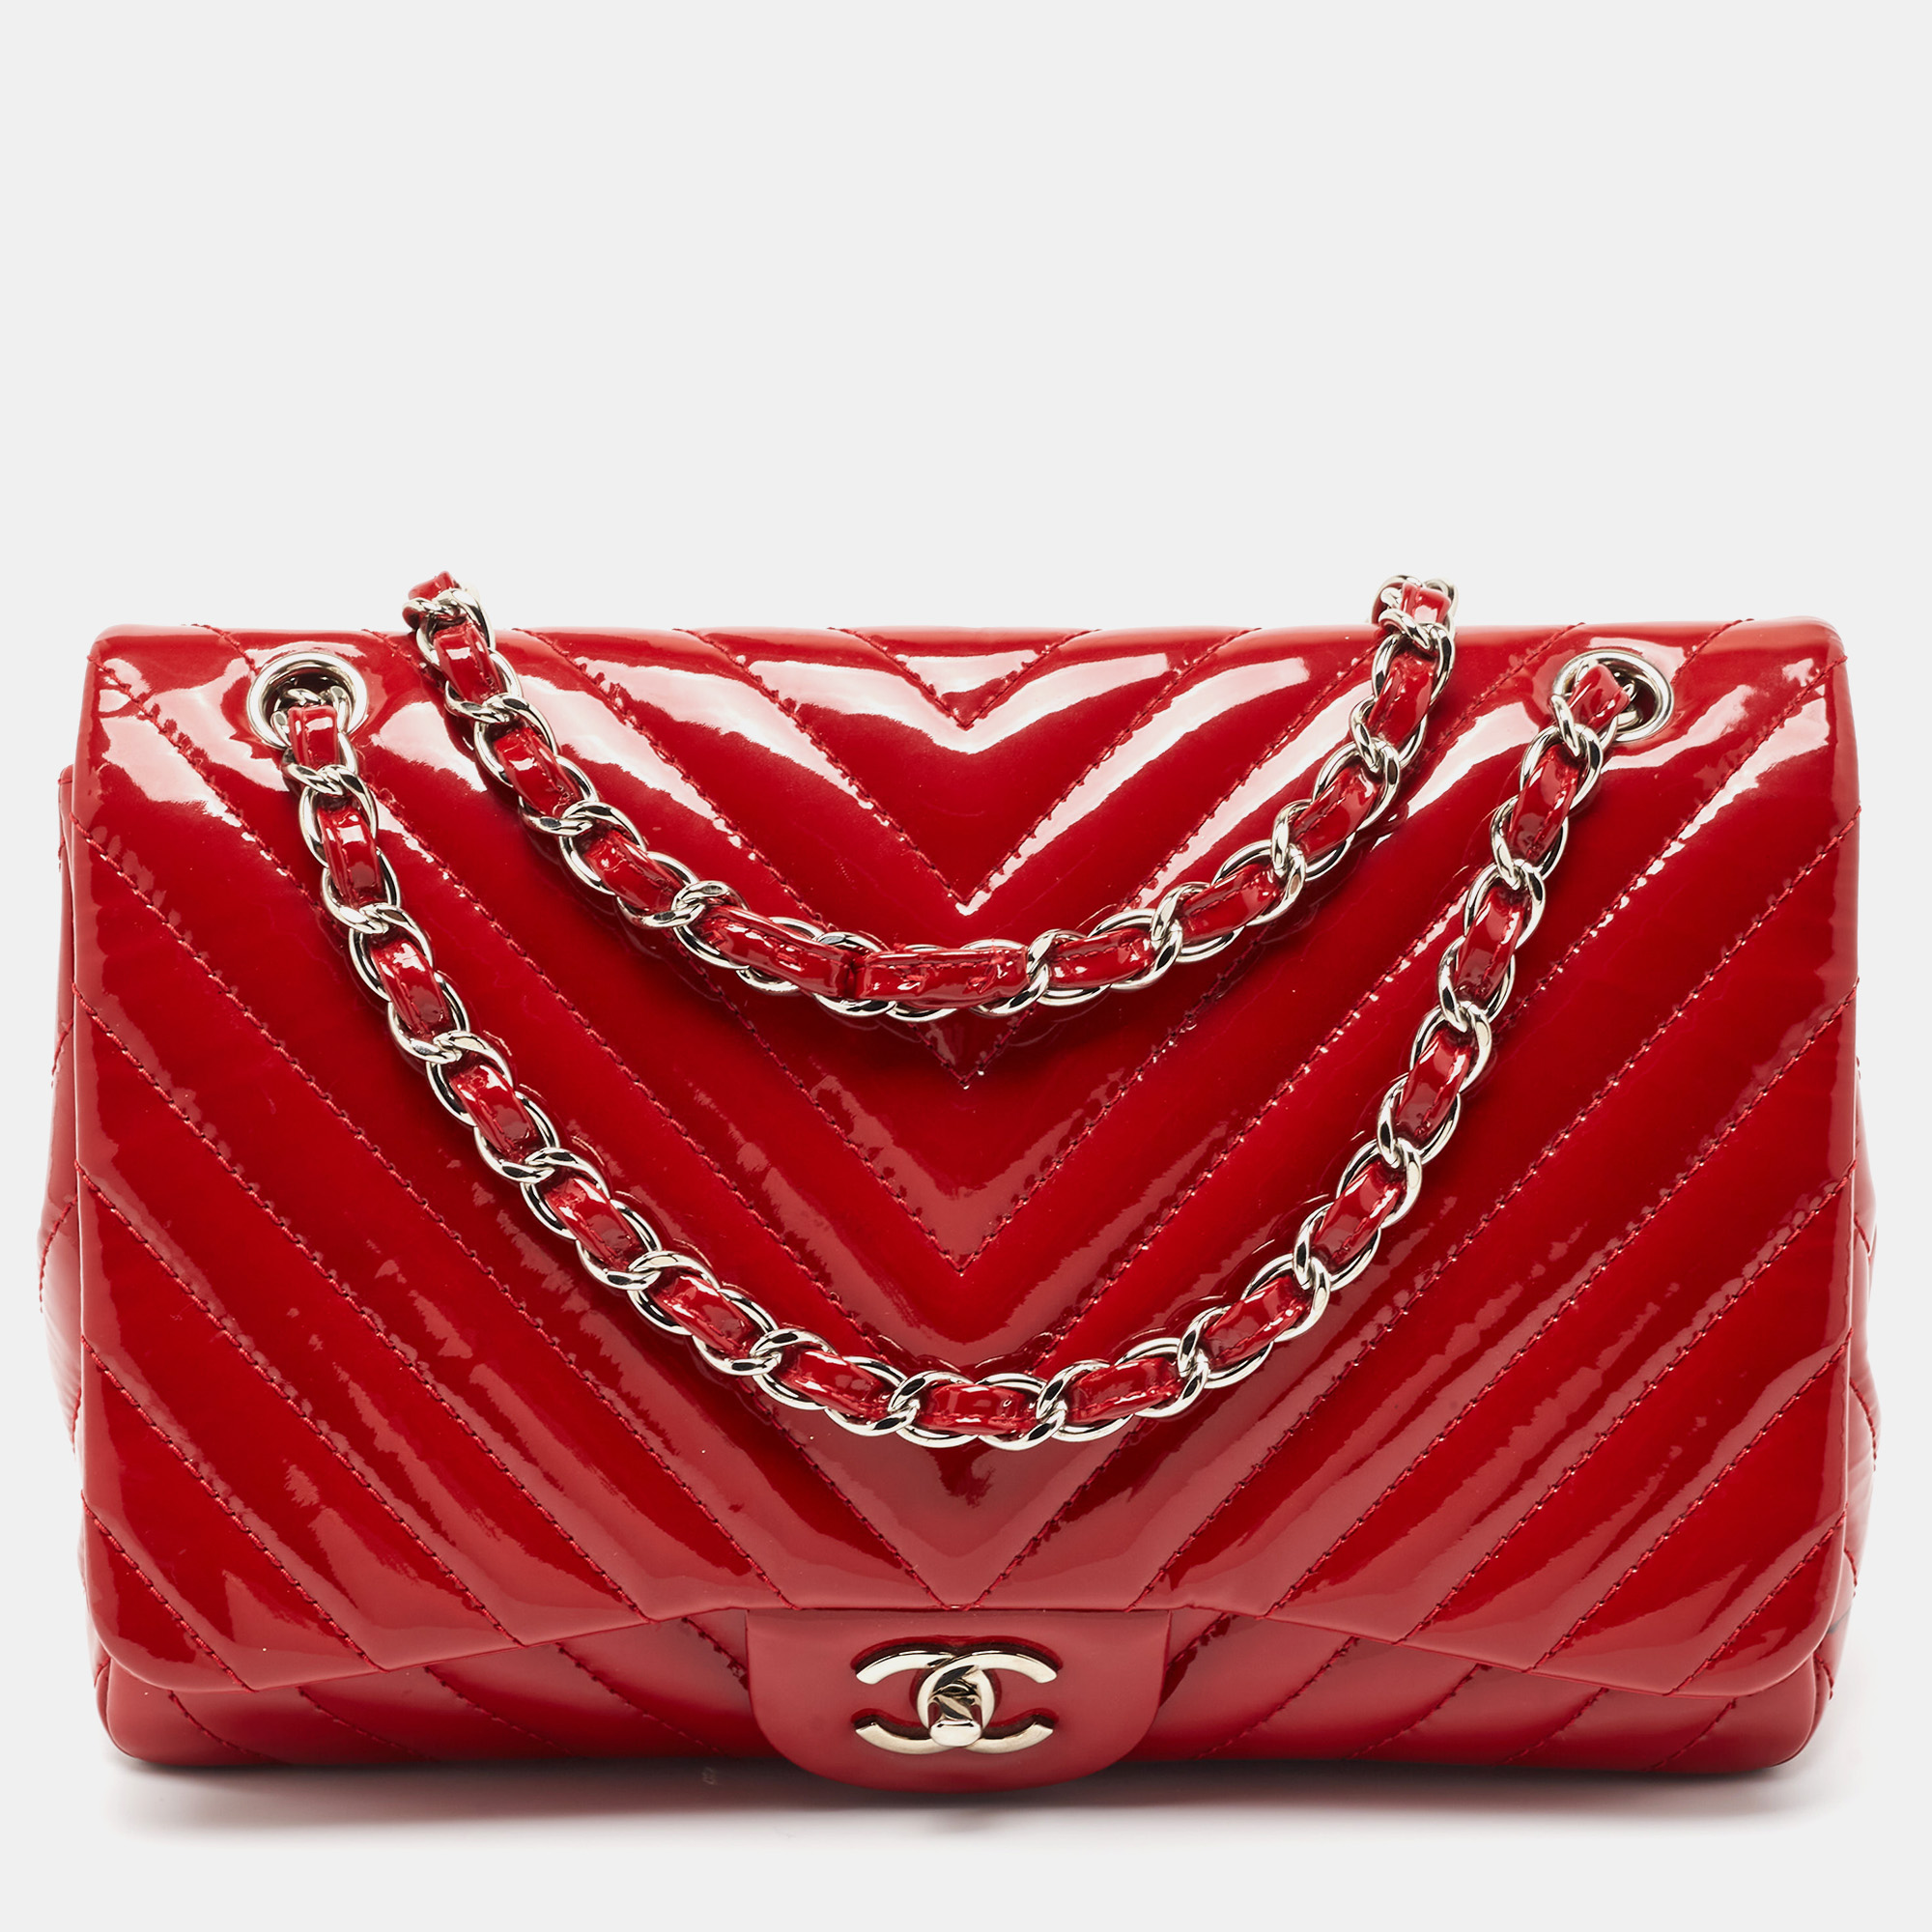 Chanel red patent leather chevron jumbo classic flap bag